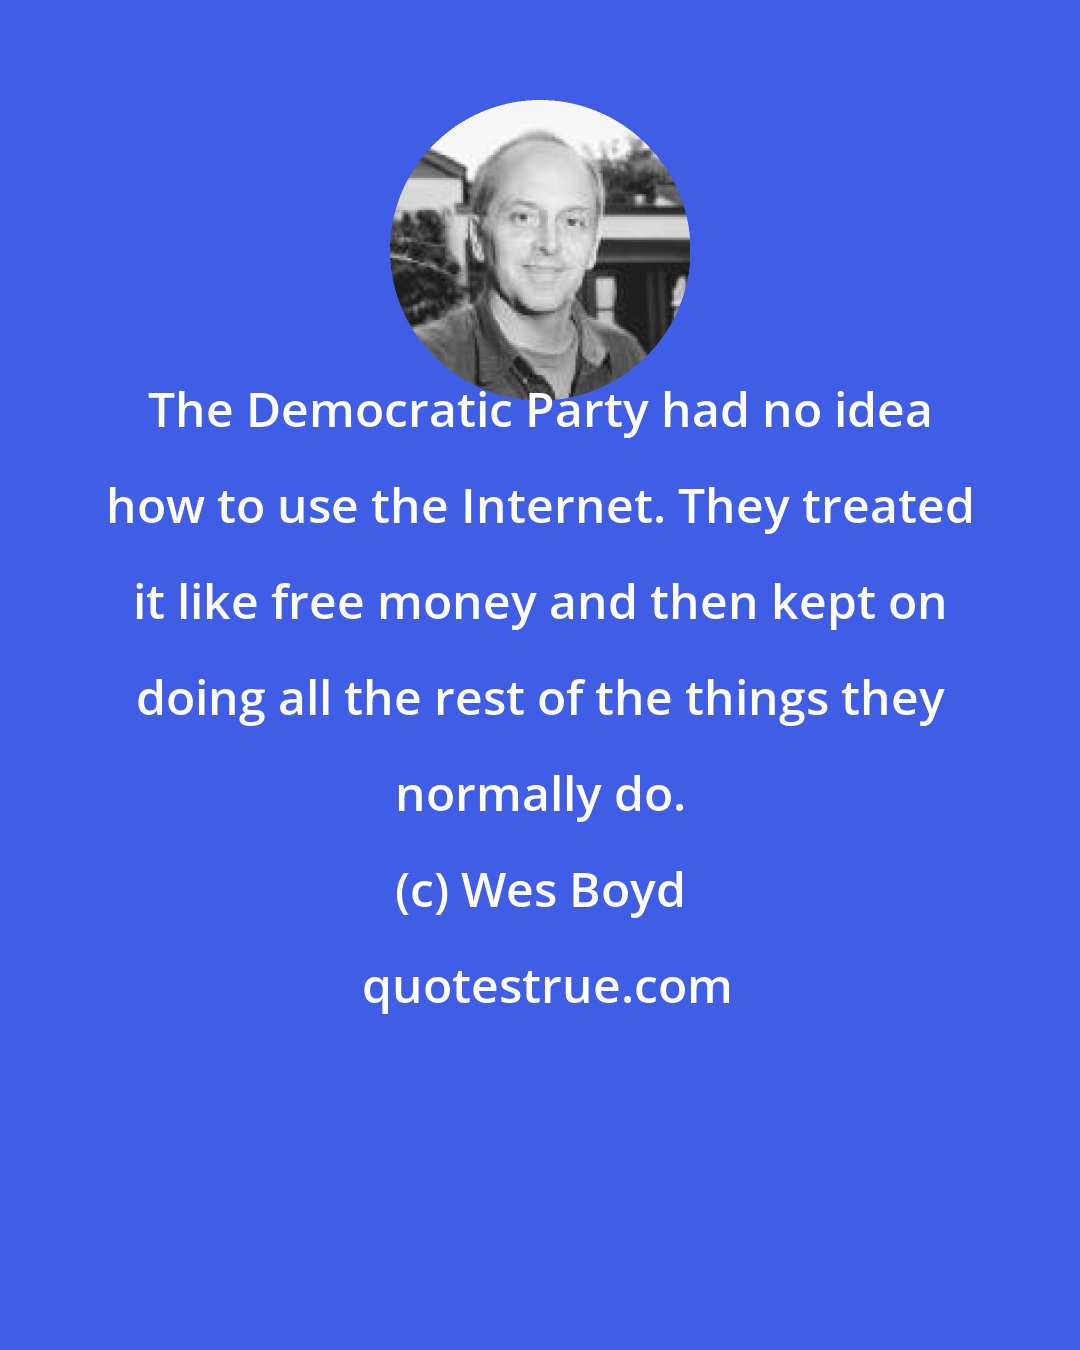 Wes Boyd: The Democratic Party had no idea how to use the Internet. They treated it like free money and then kept on doing all the rest of the things they normally do.